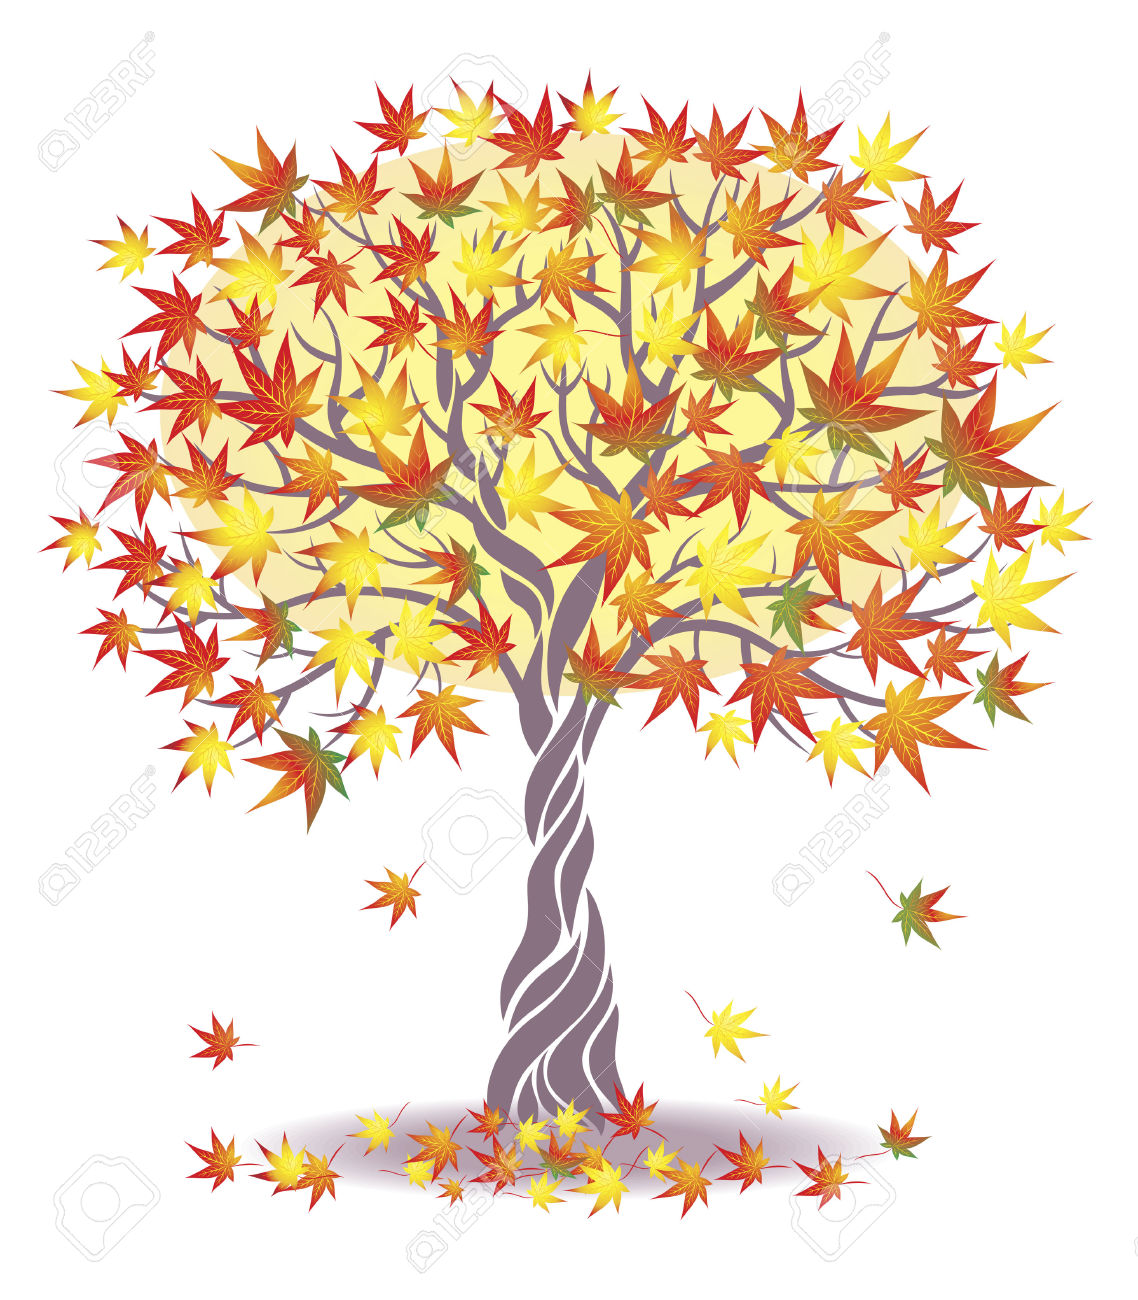 Maple tree clipart - Clipground